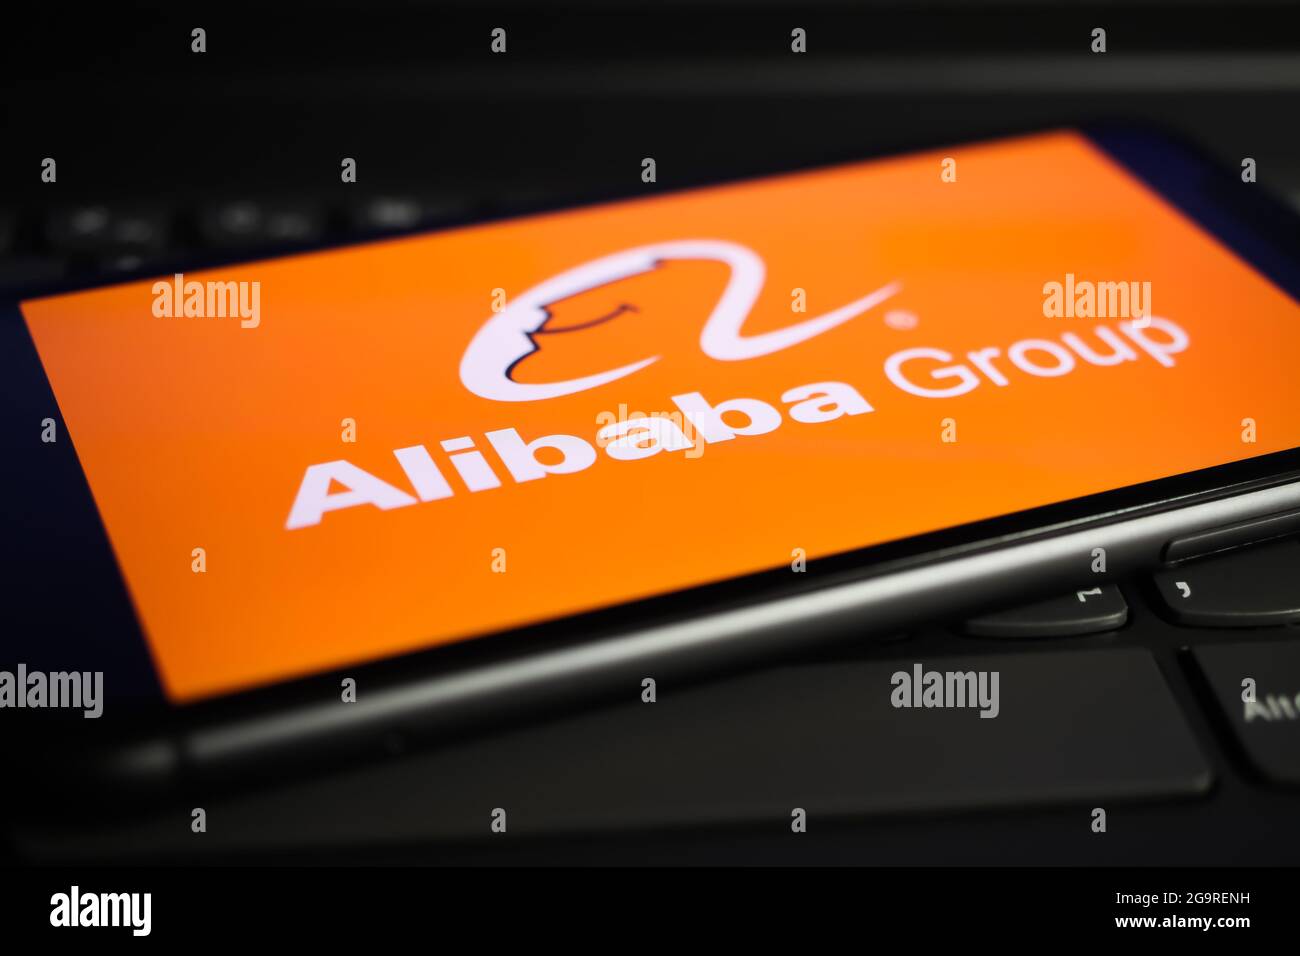 Viersen, Germany - June 1. 2021: Closeup of mobile phone screen with logo lettering of alibaba on computer keyboard Stock Photo